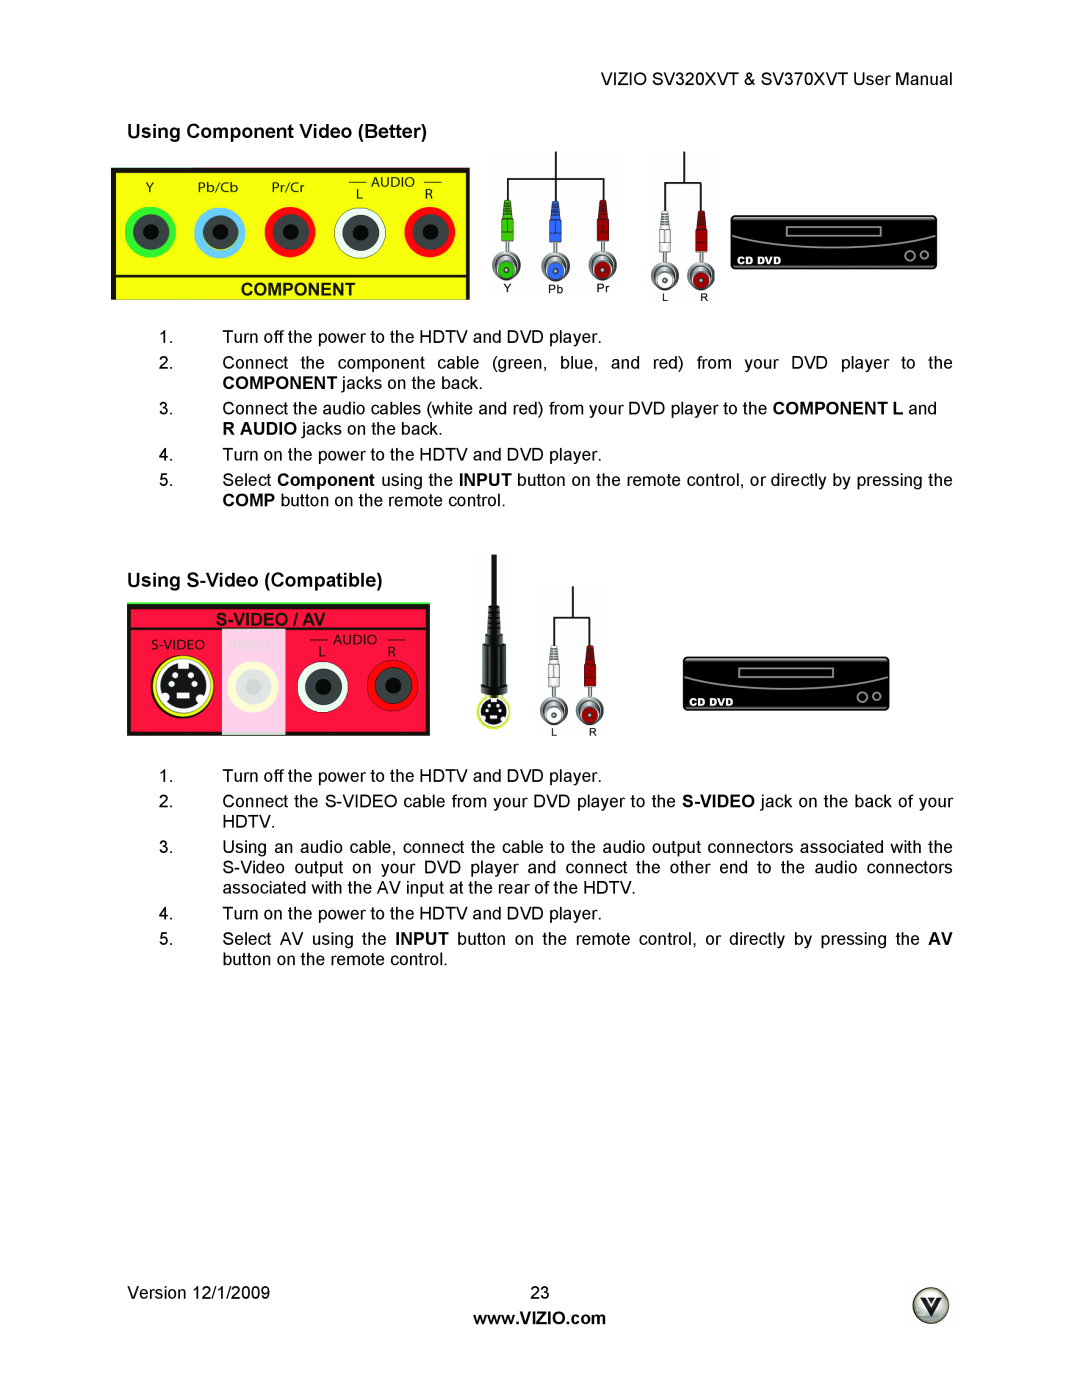 Vizio SV370XVT, SV320XVT user manual Using Component Video Better, Using S-Video Compatible 